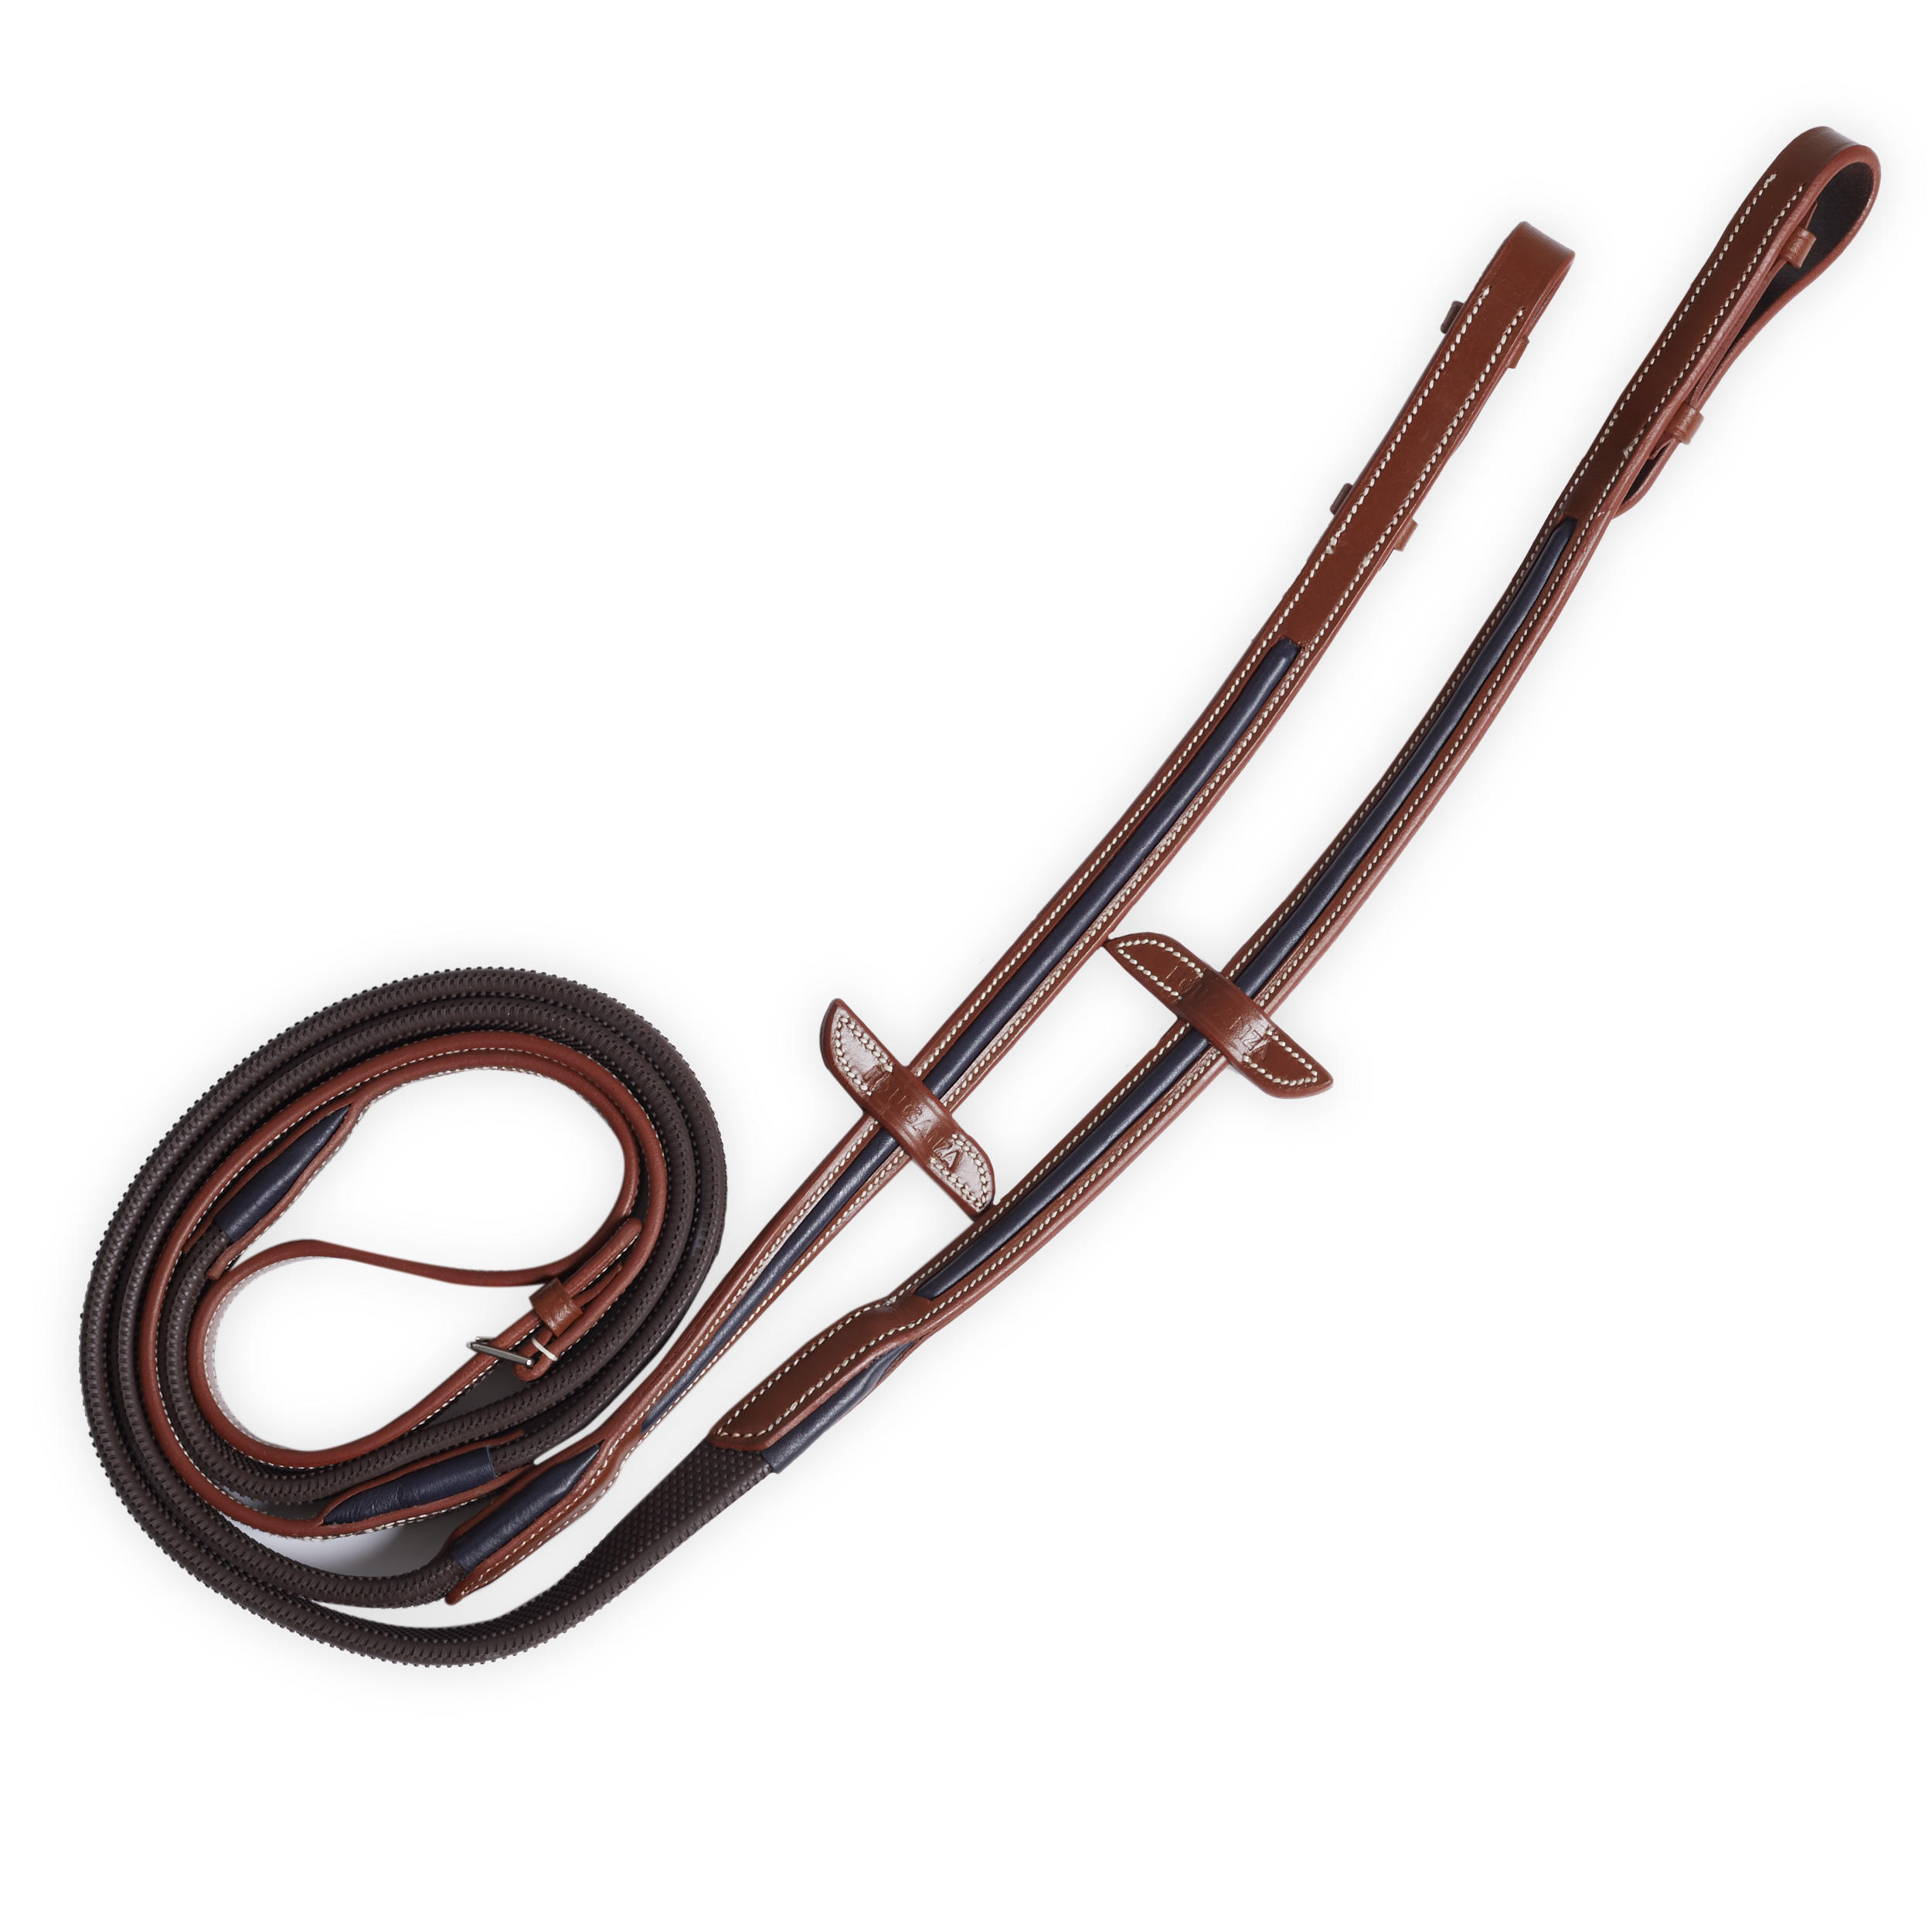 FOUGANZA Horse and Pony Riding Leather Reins 900 Grip - Light Brown